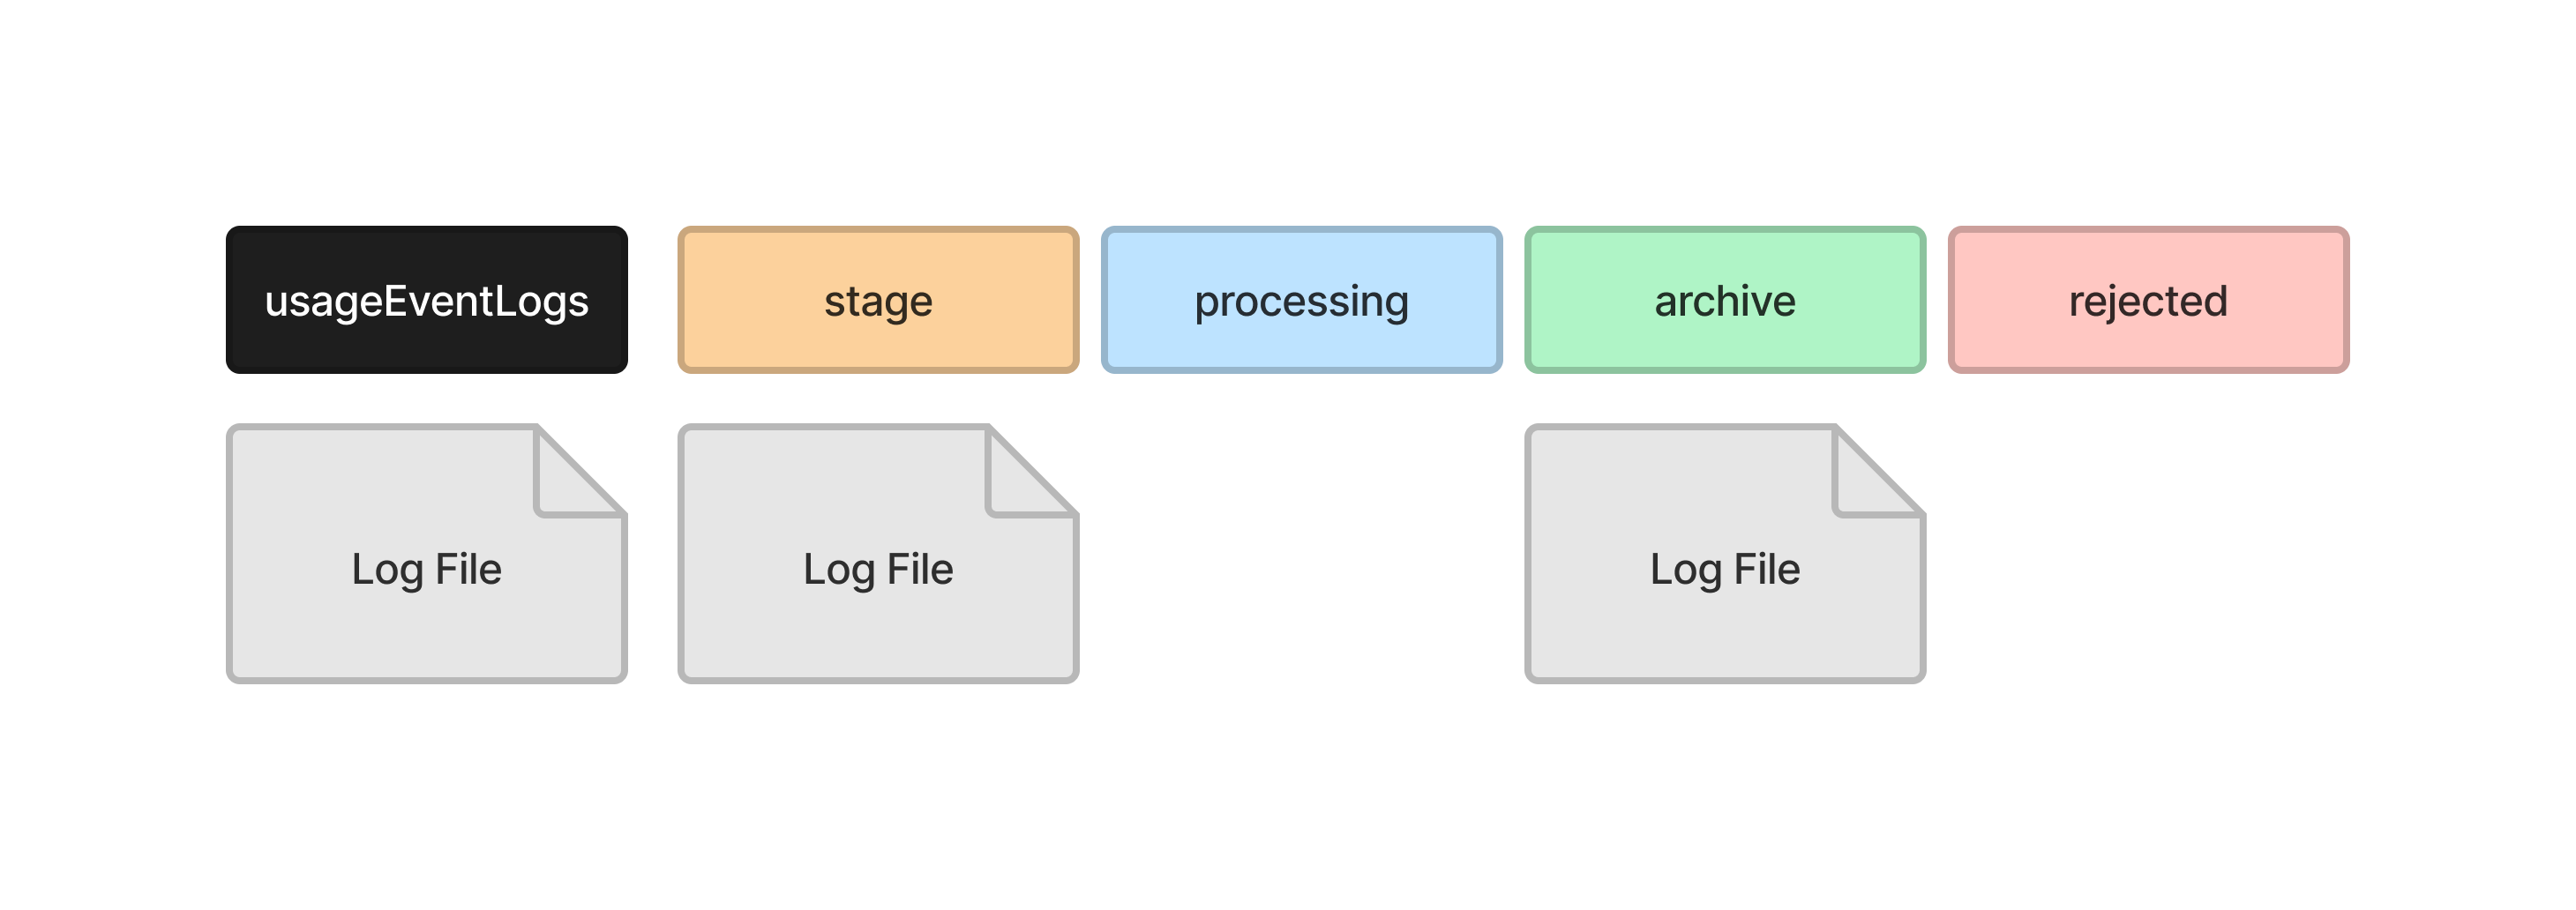 Diagram of log files finished processing